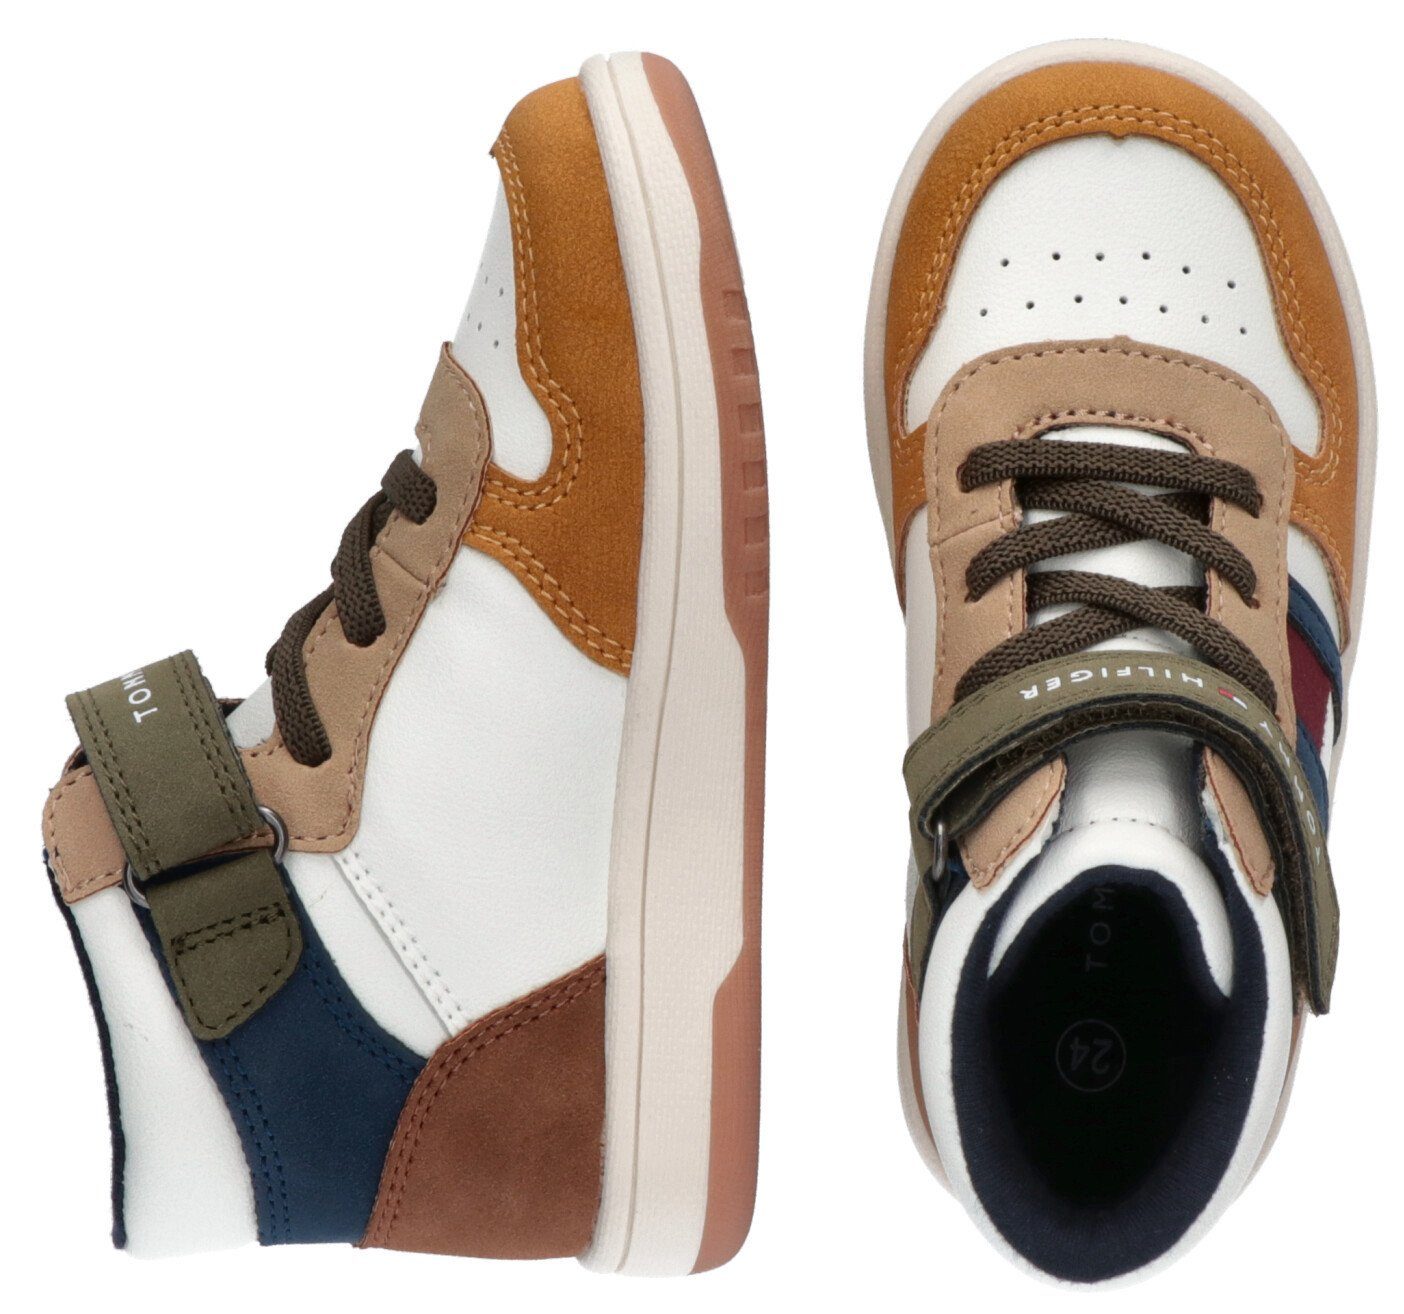 Tommy colorblocking Look FLAG im Sneaker TOP Hilfiger HIGH LACE-UP/VELCRO modischen SNEAKER